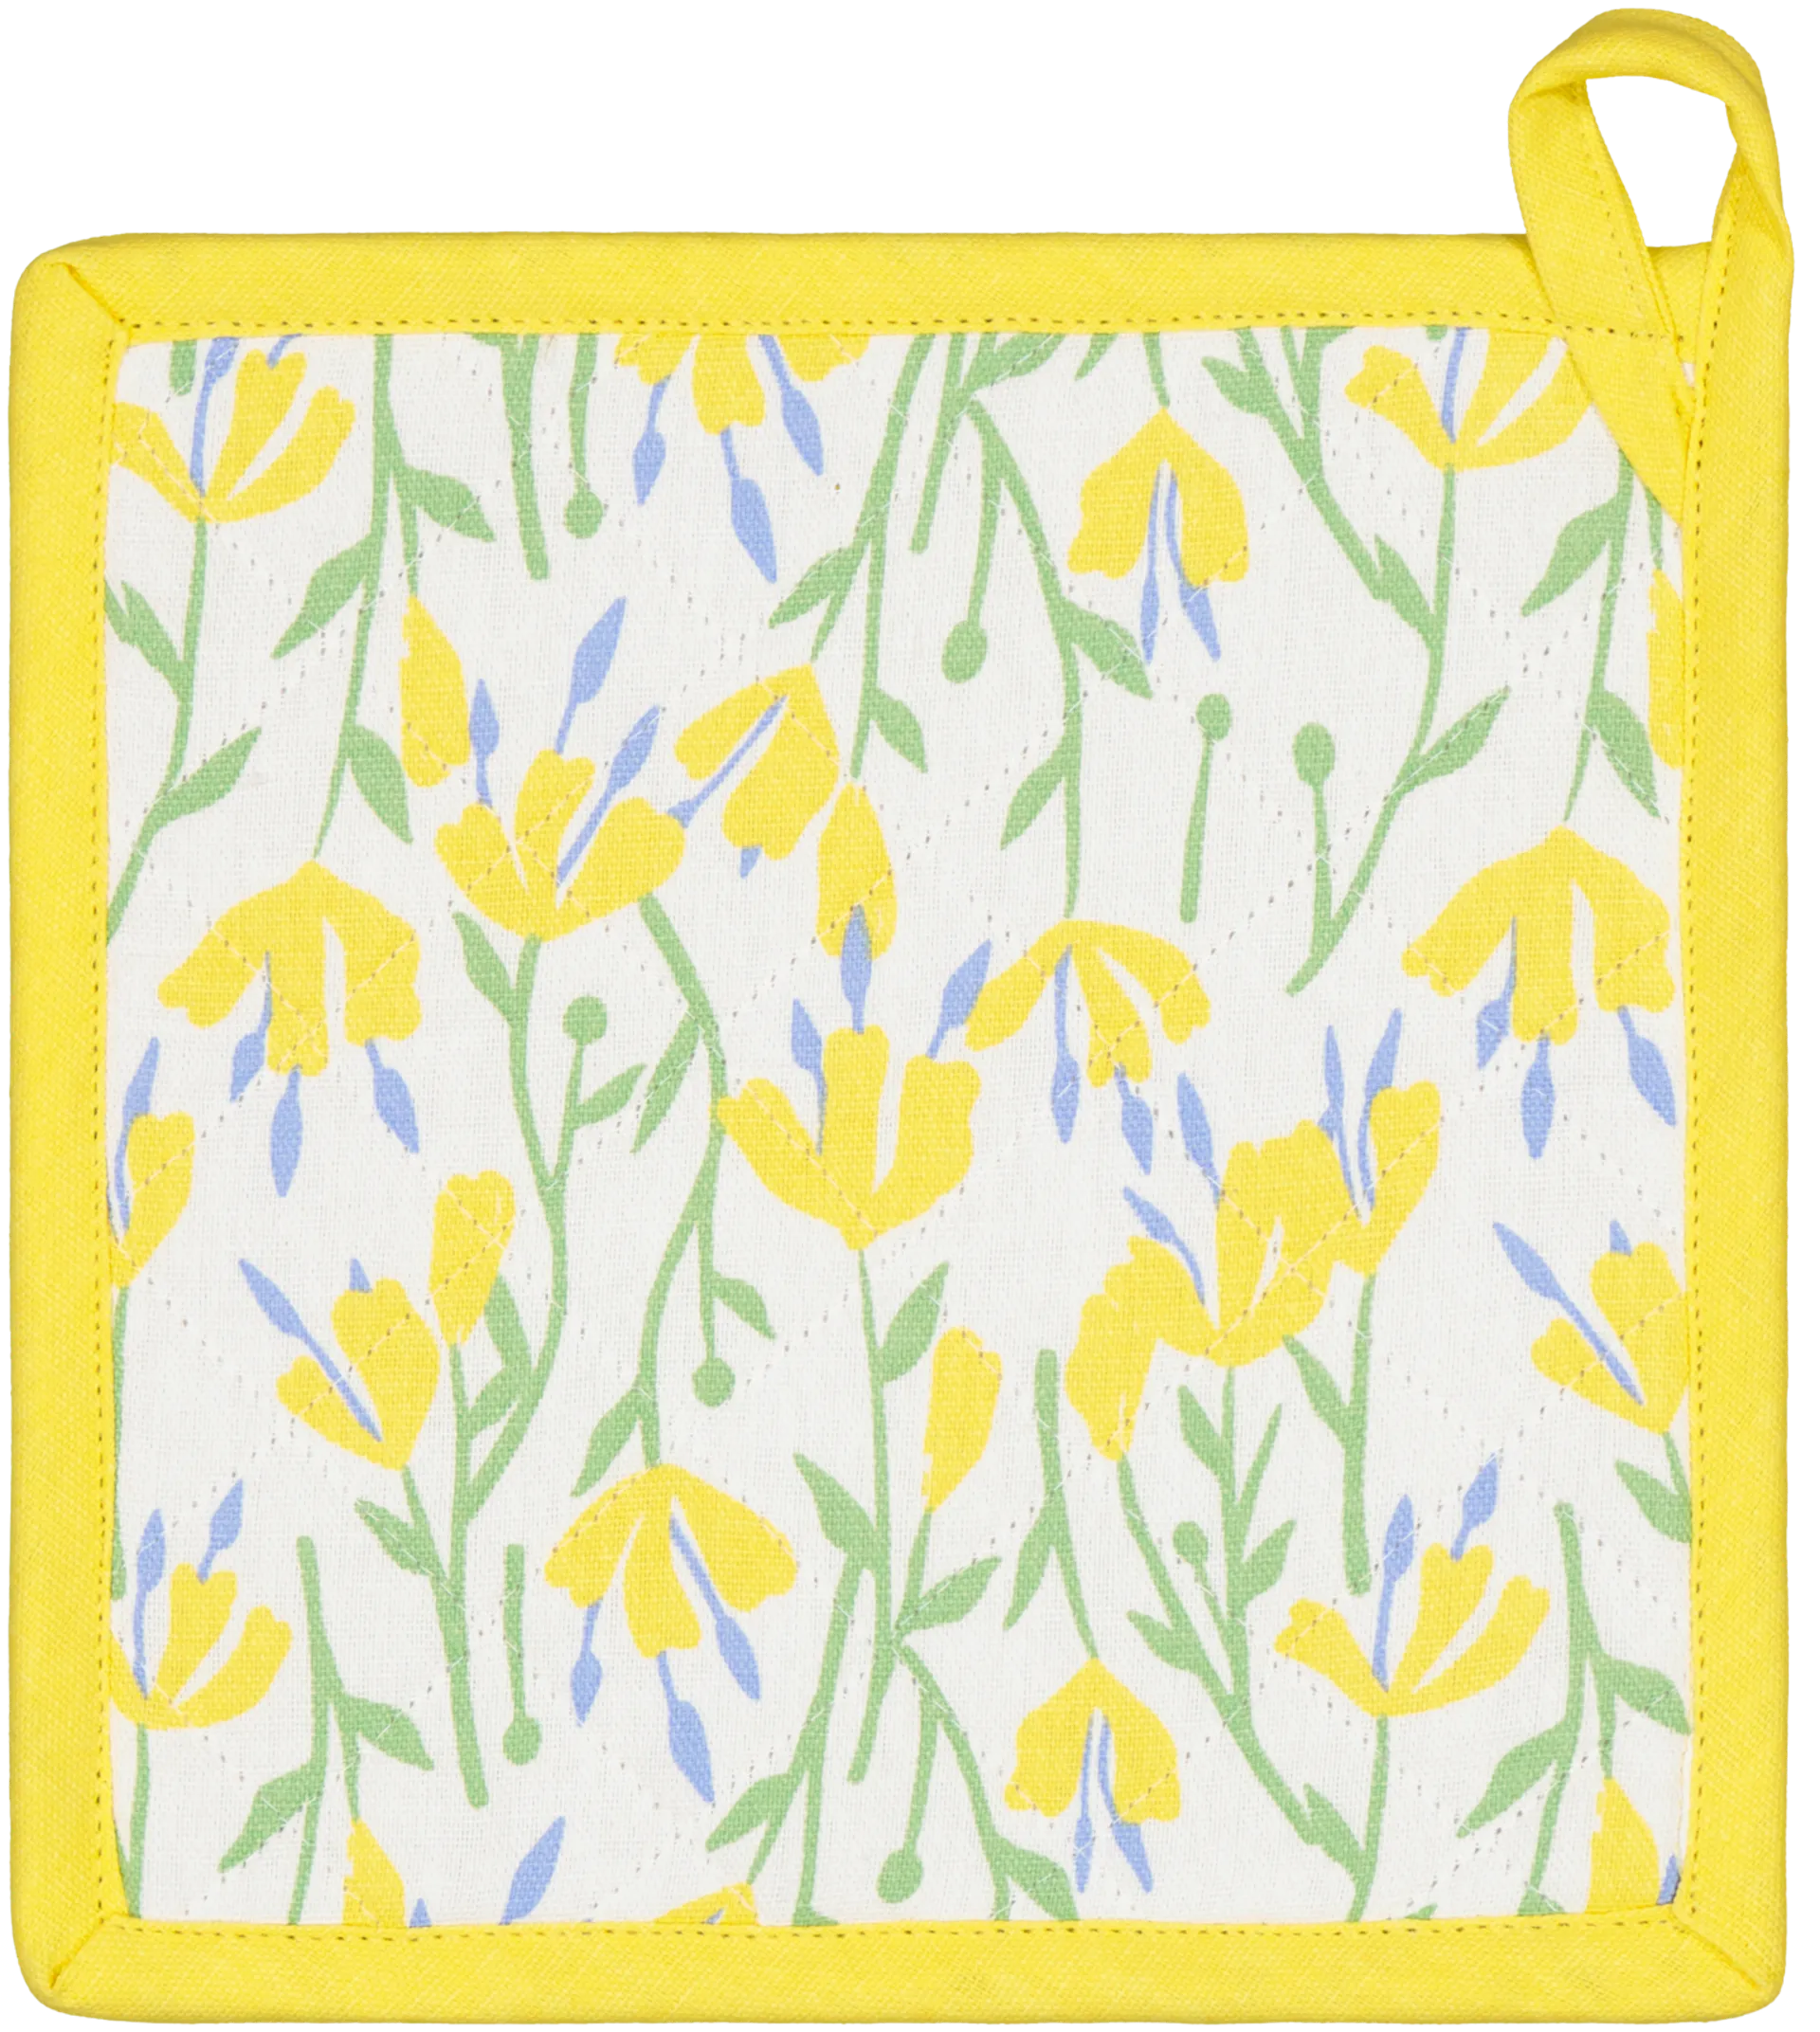 House patalappu Summer Flowers 22 x 22 cm PatternLab - 2